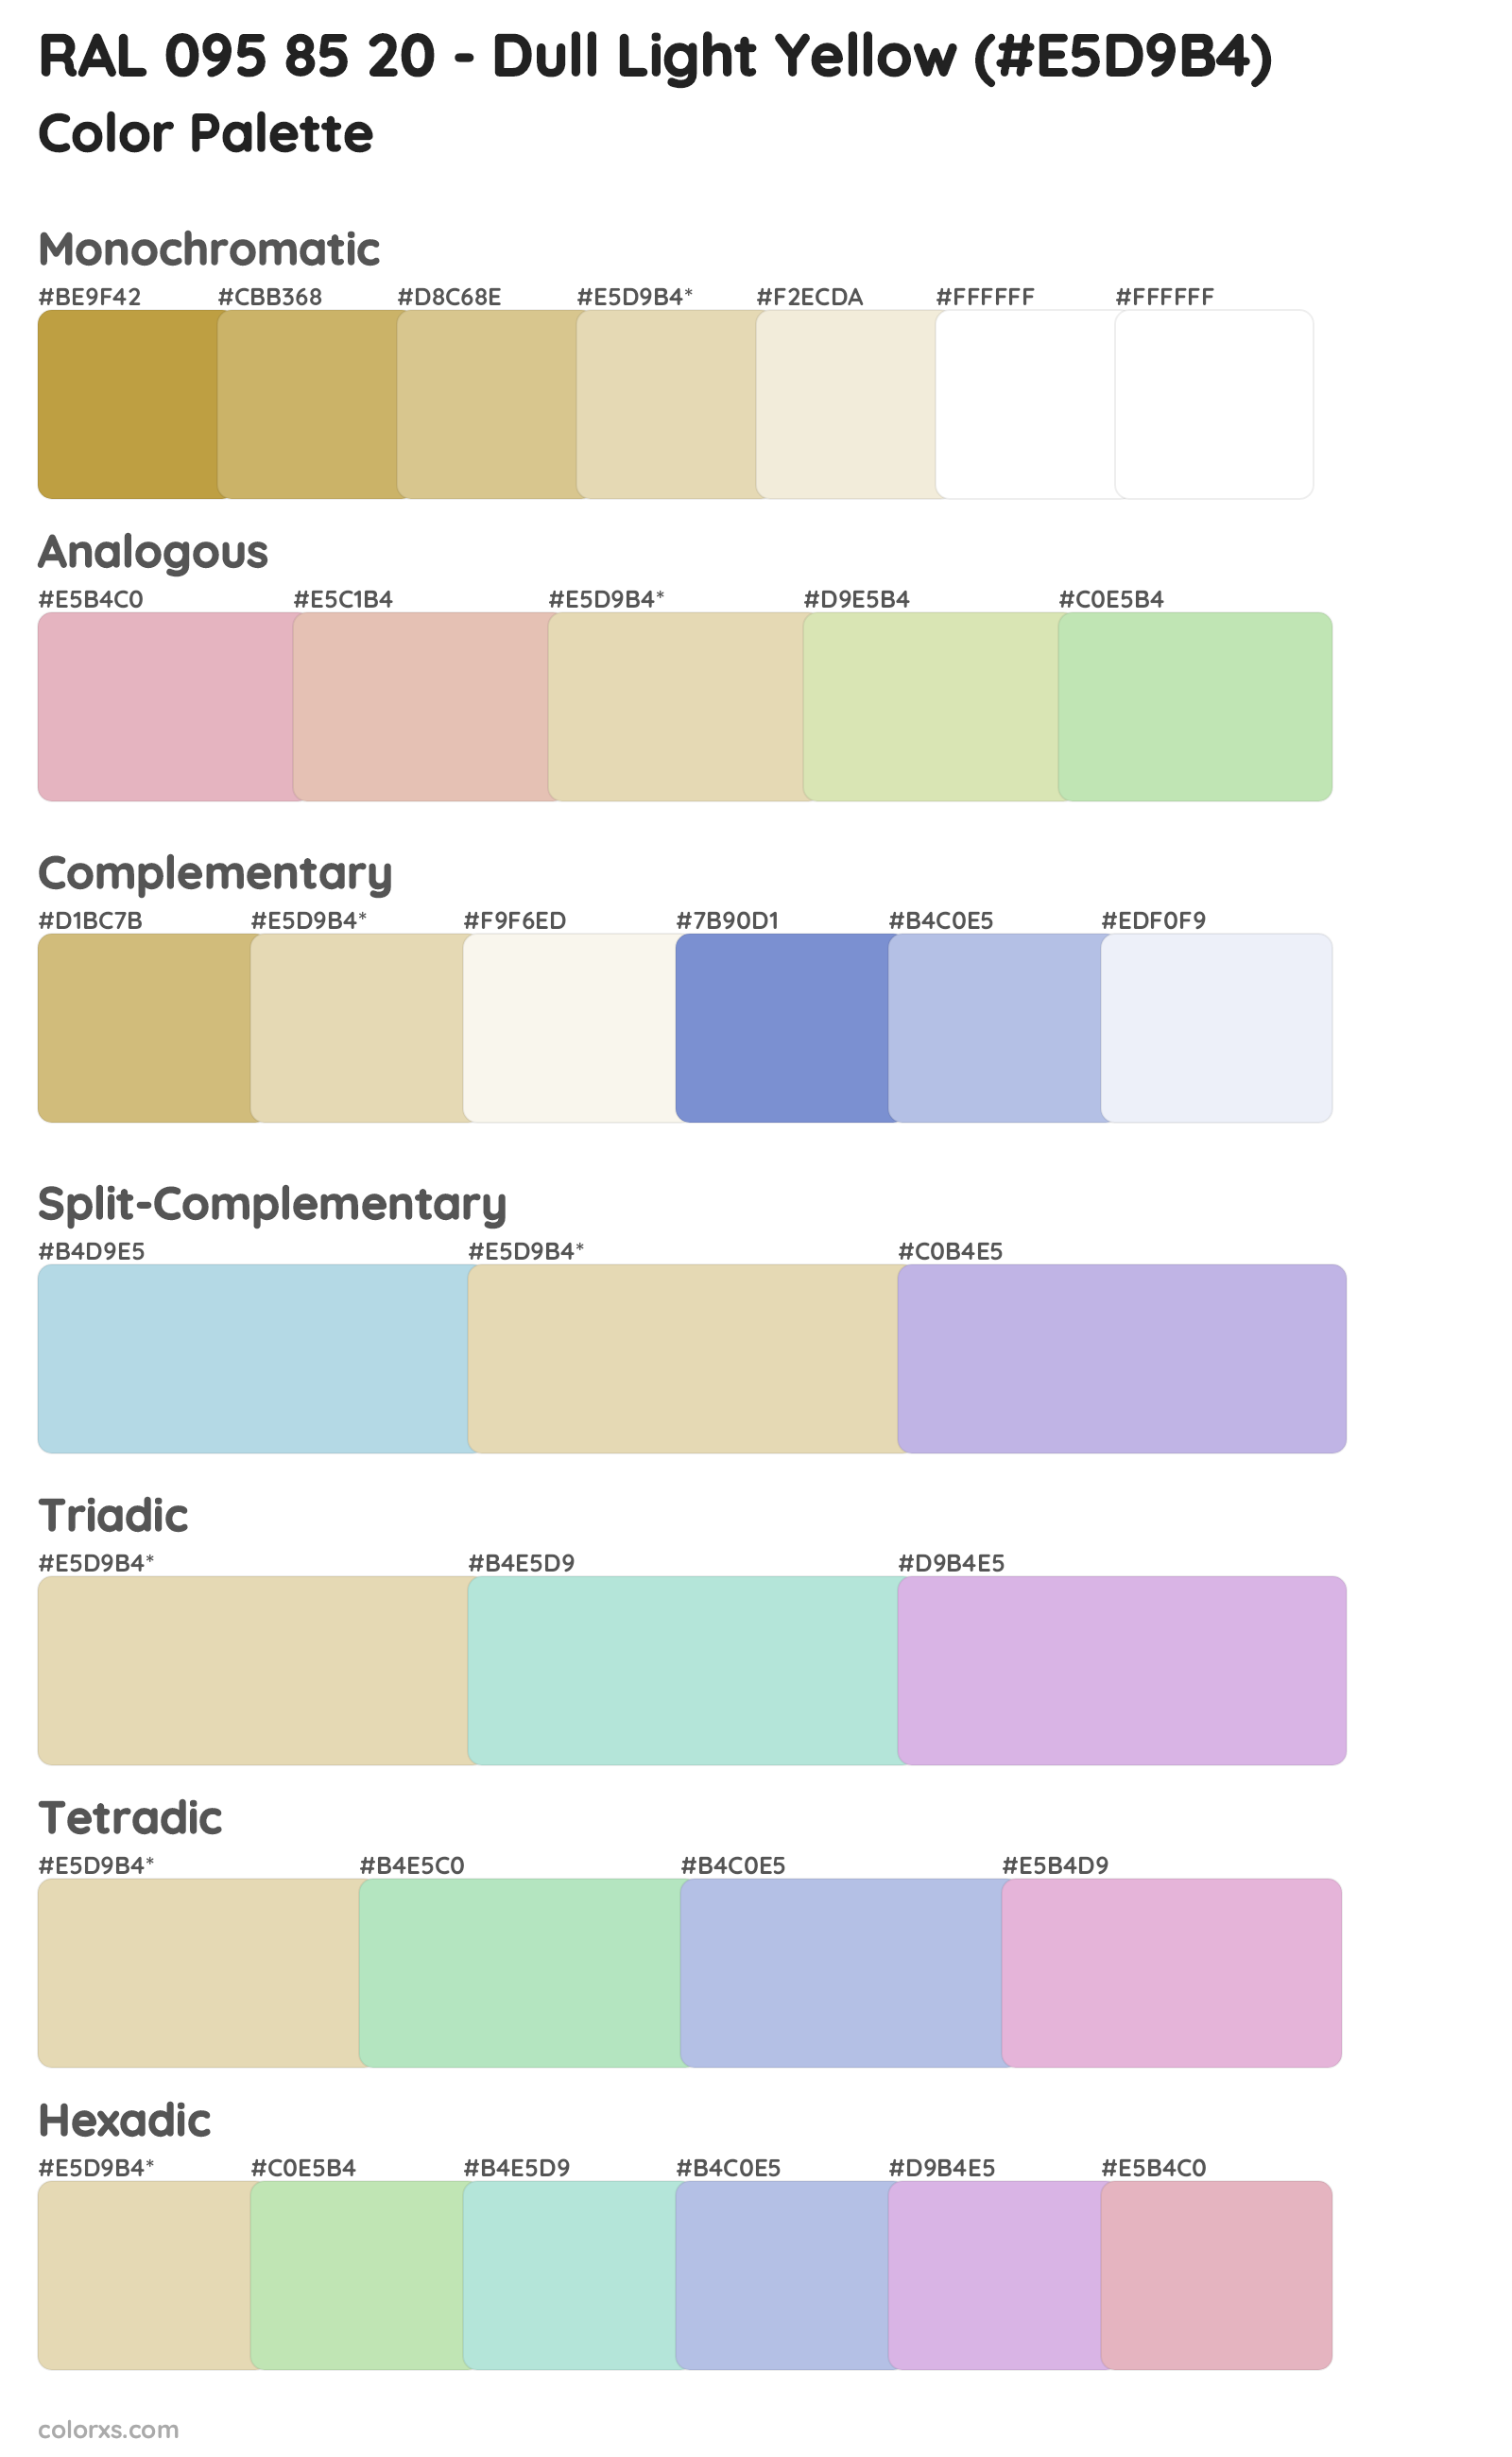 RAL 095 85 20 - Dull Light Yellow Color Scheme Palettes